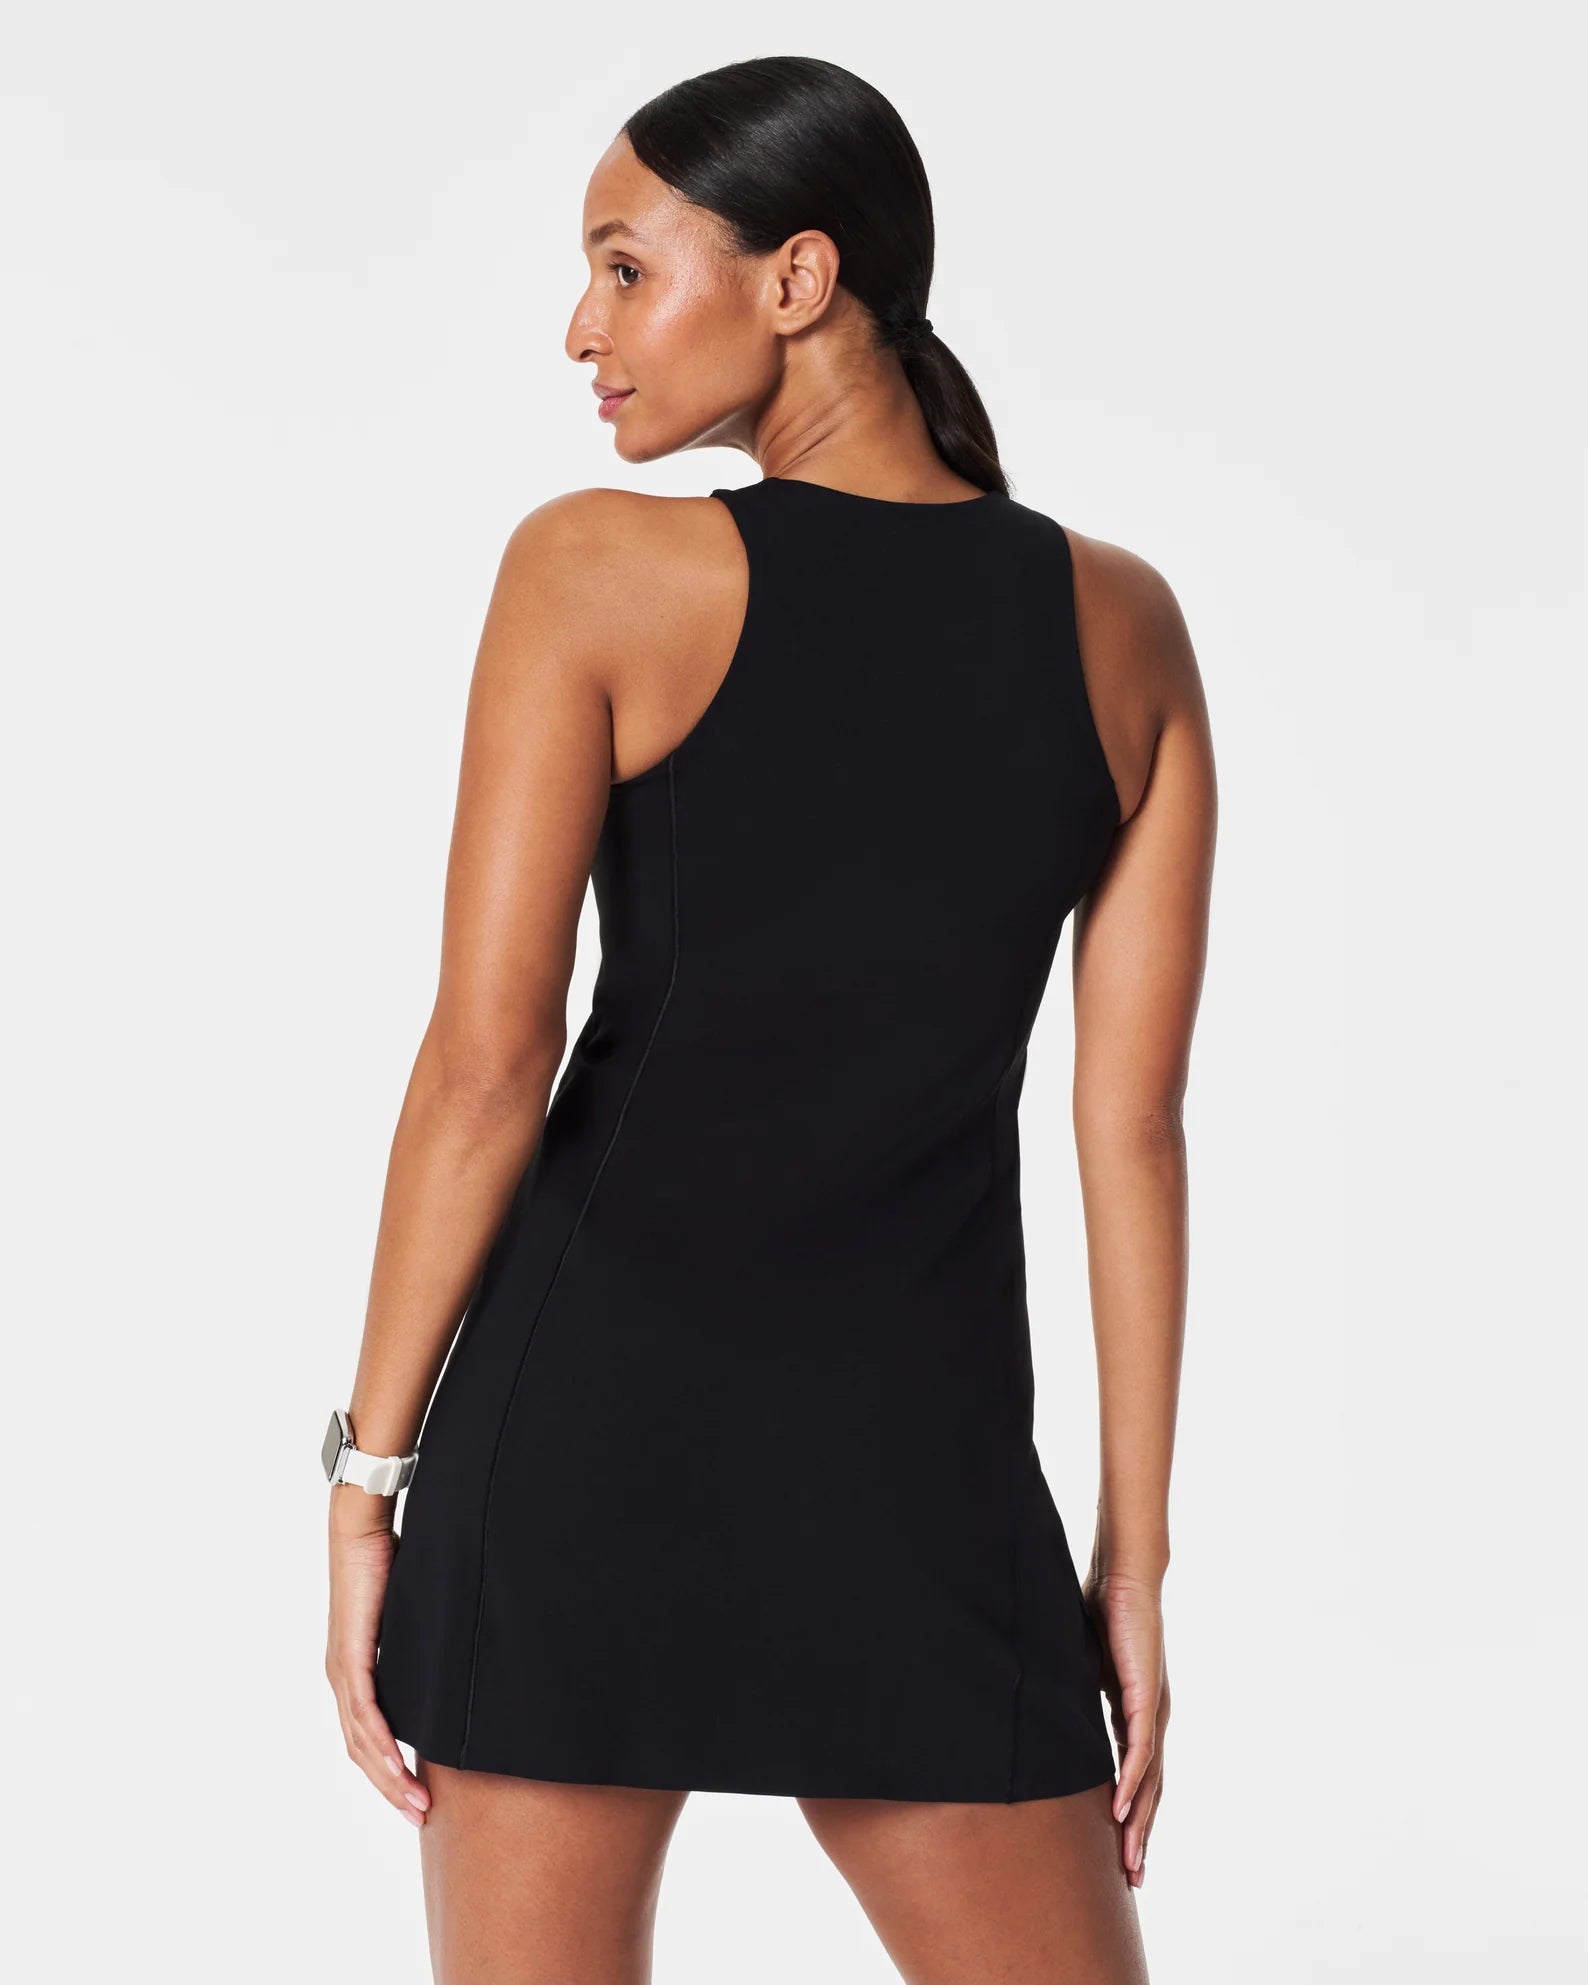 The Get Moving Zip Easy Access Dress